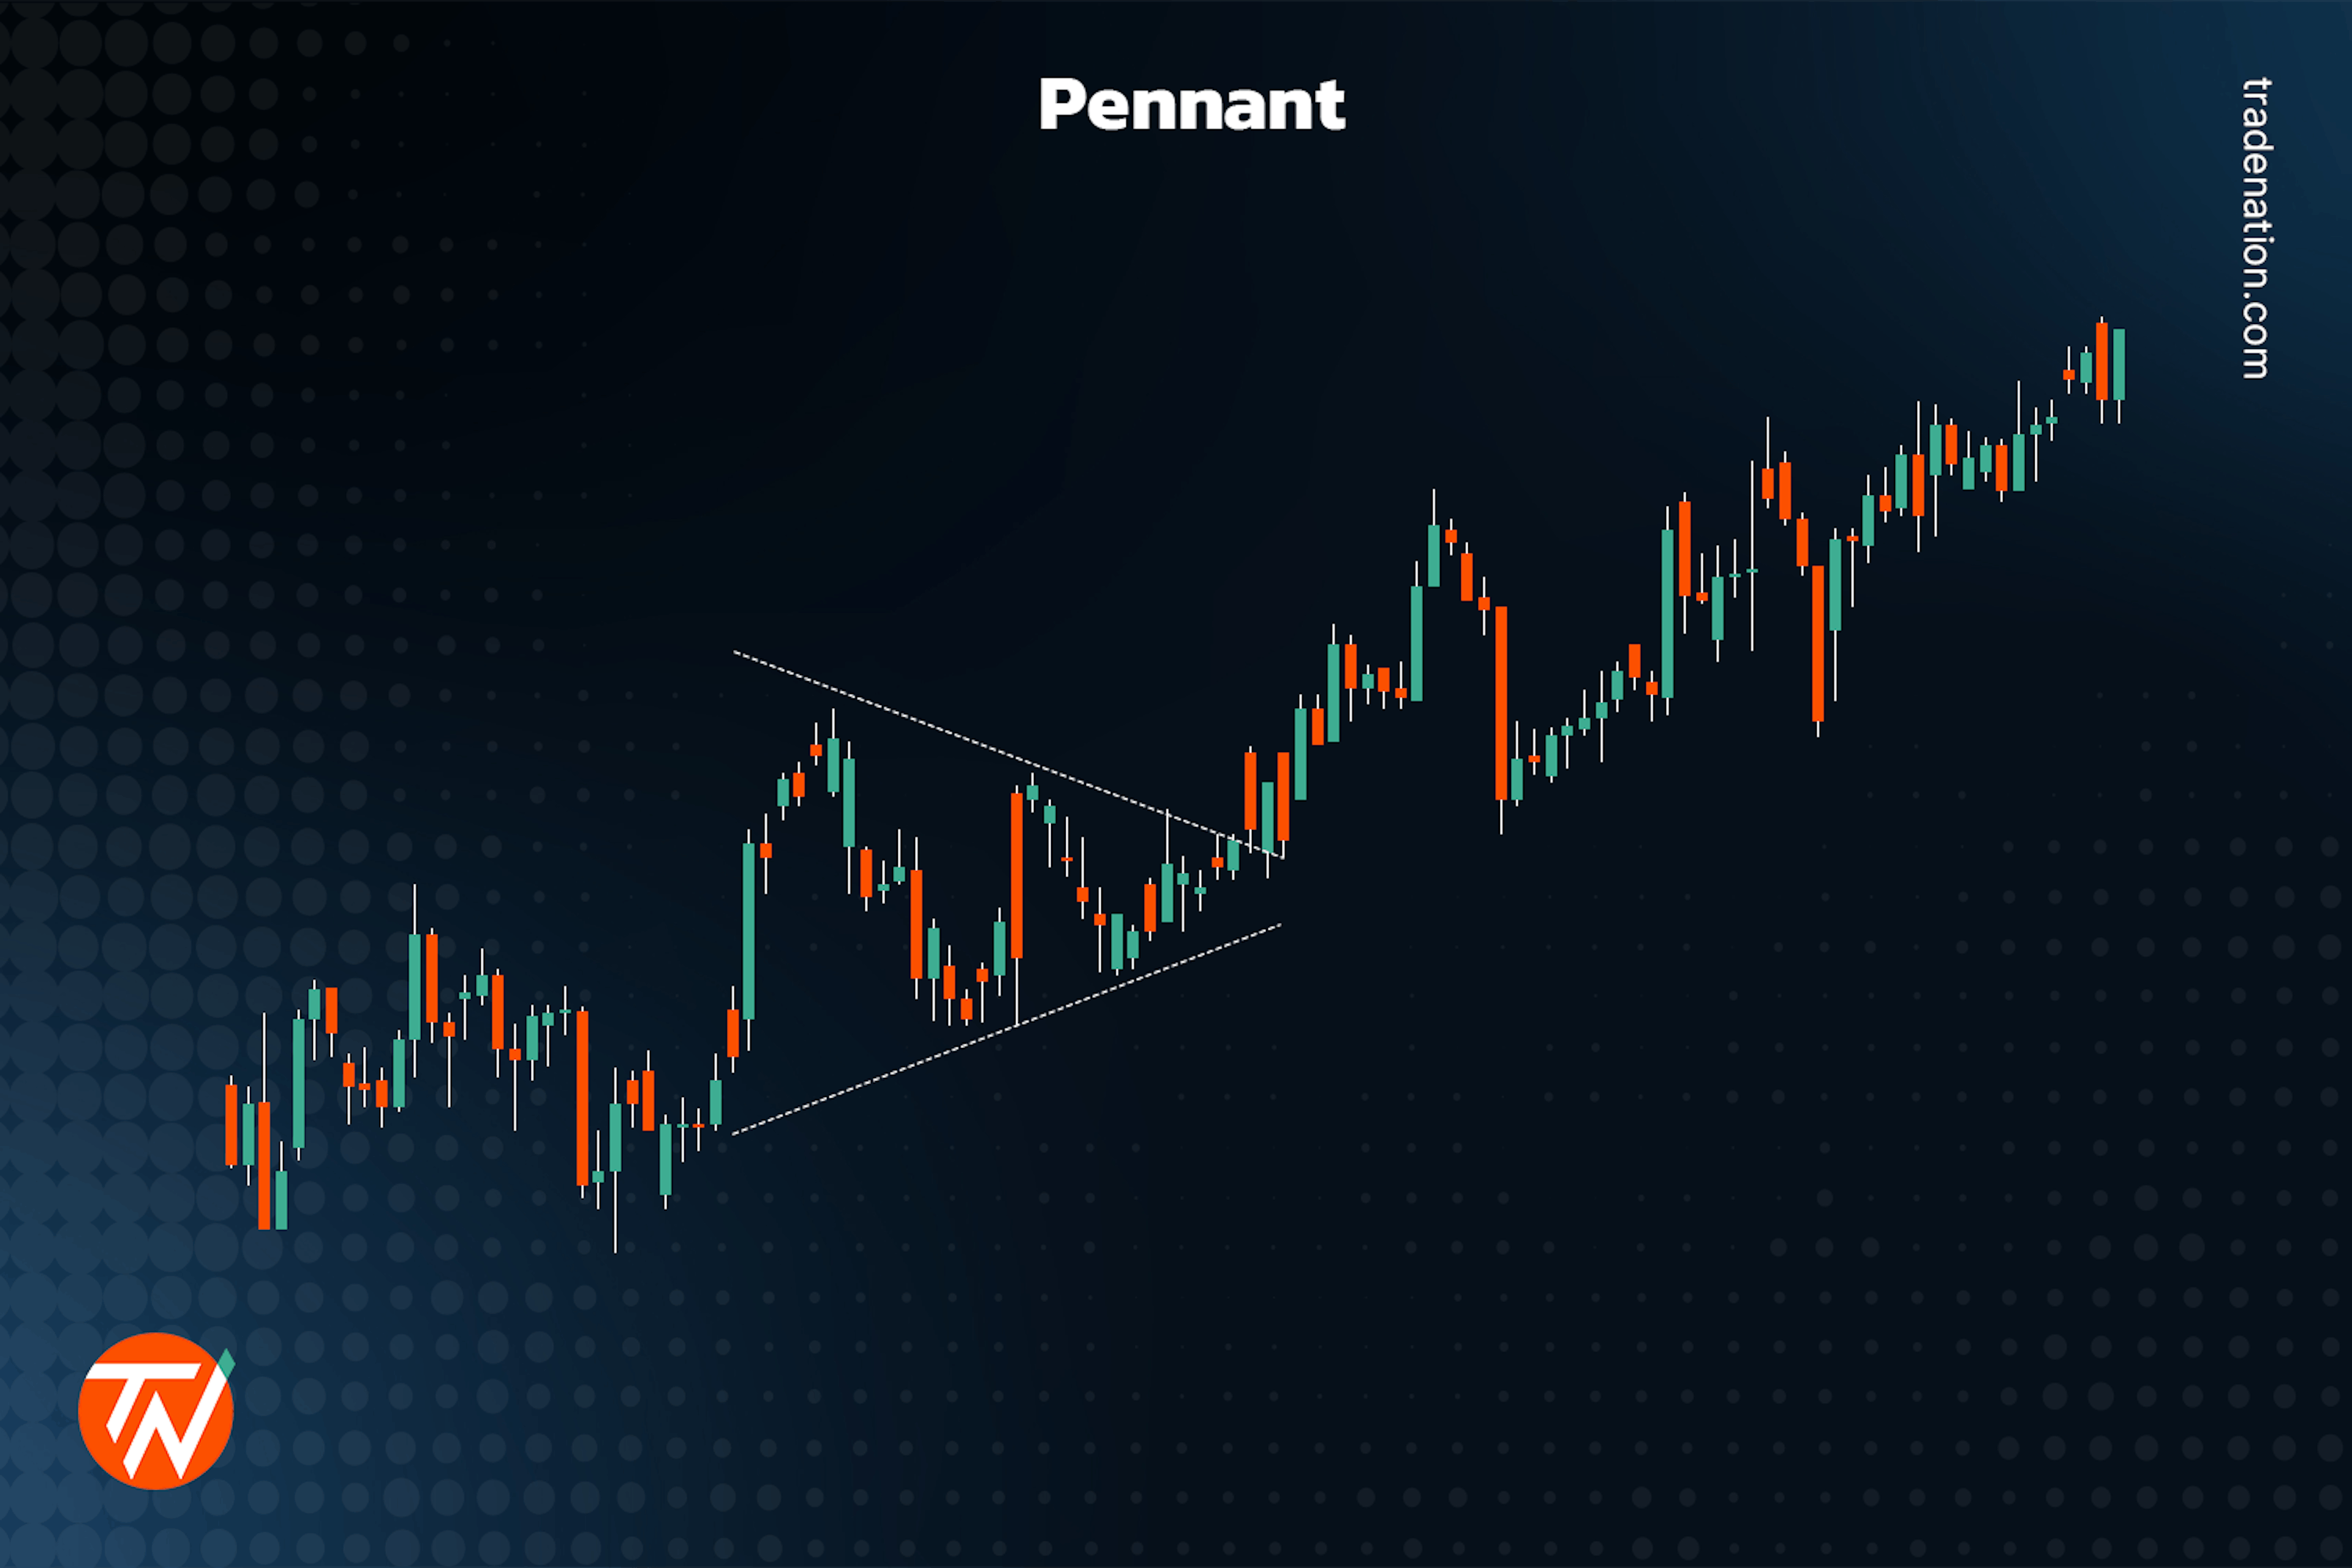 Pennant in trading